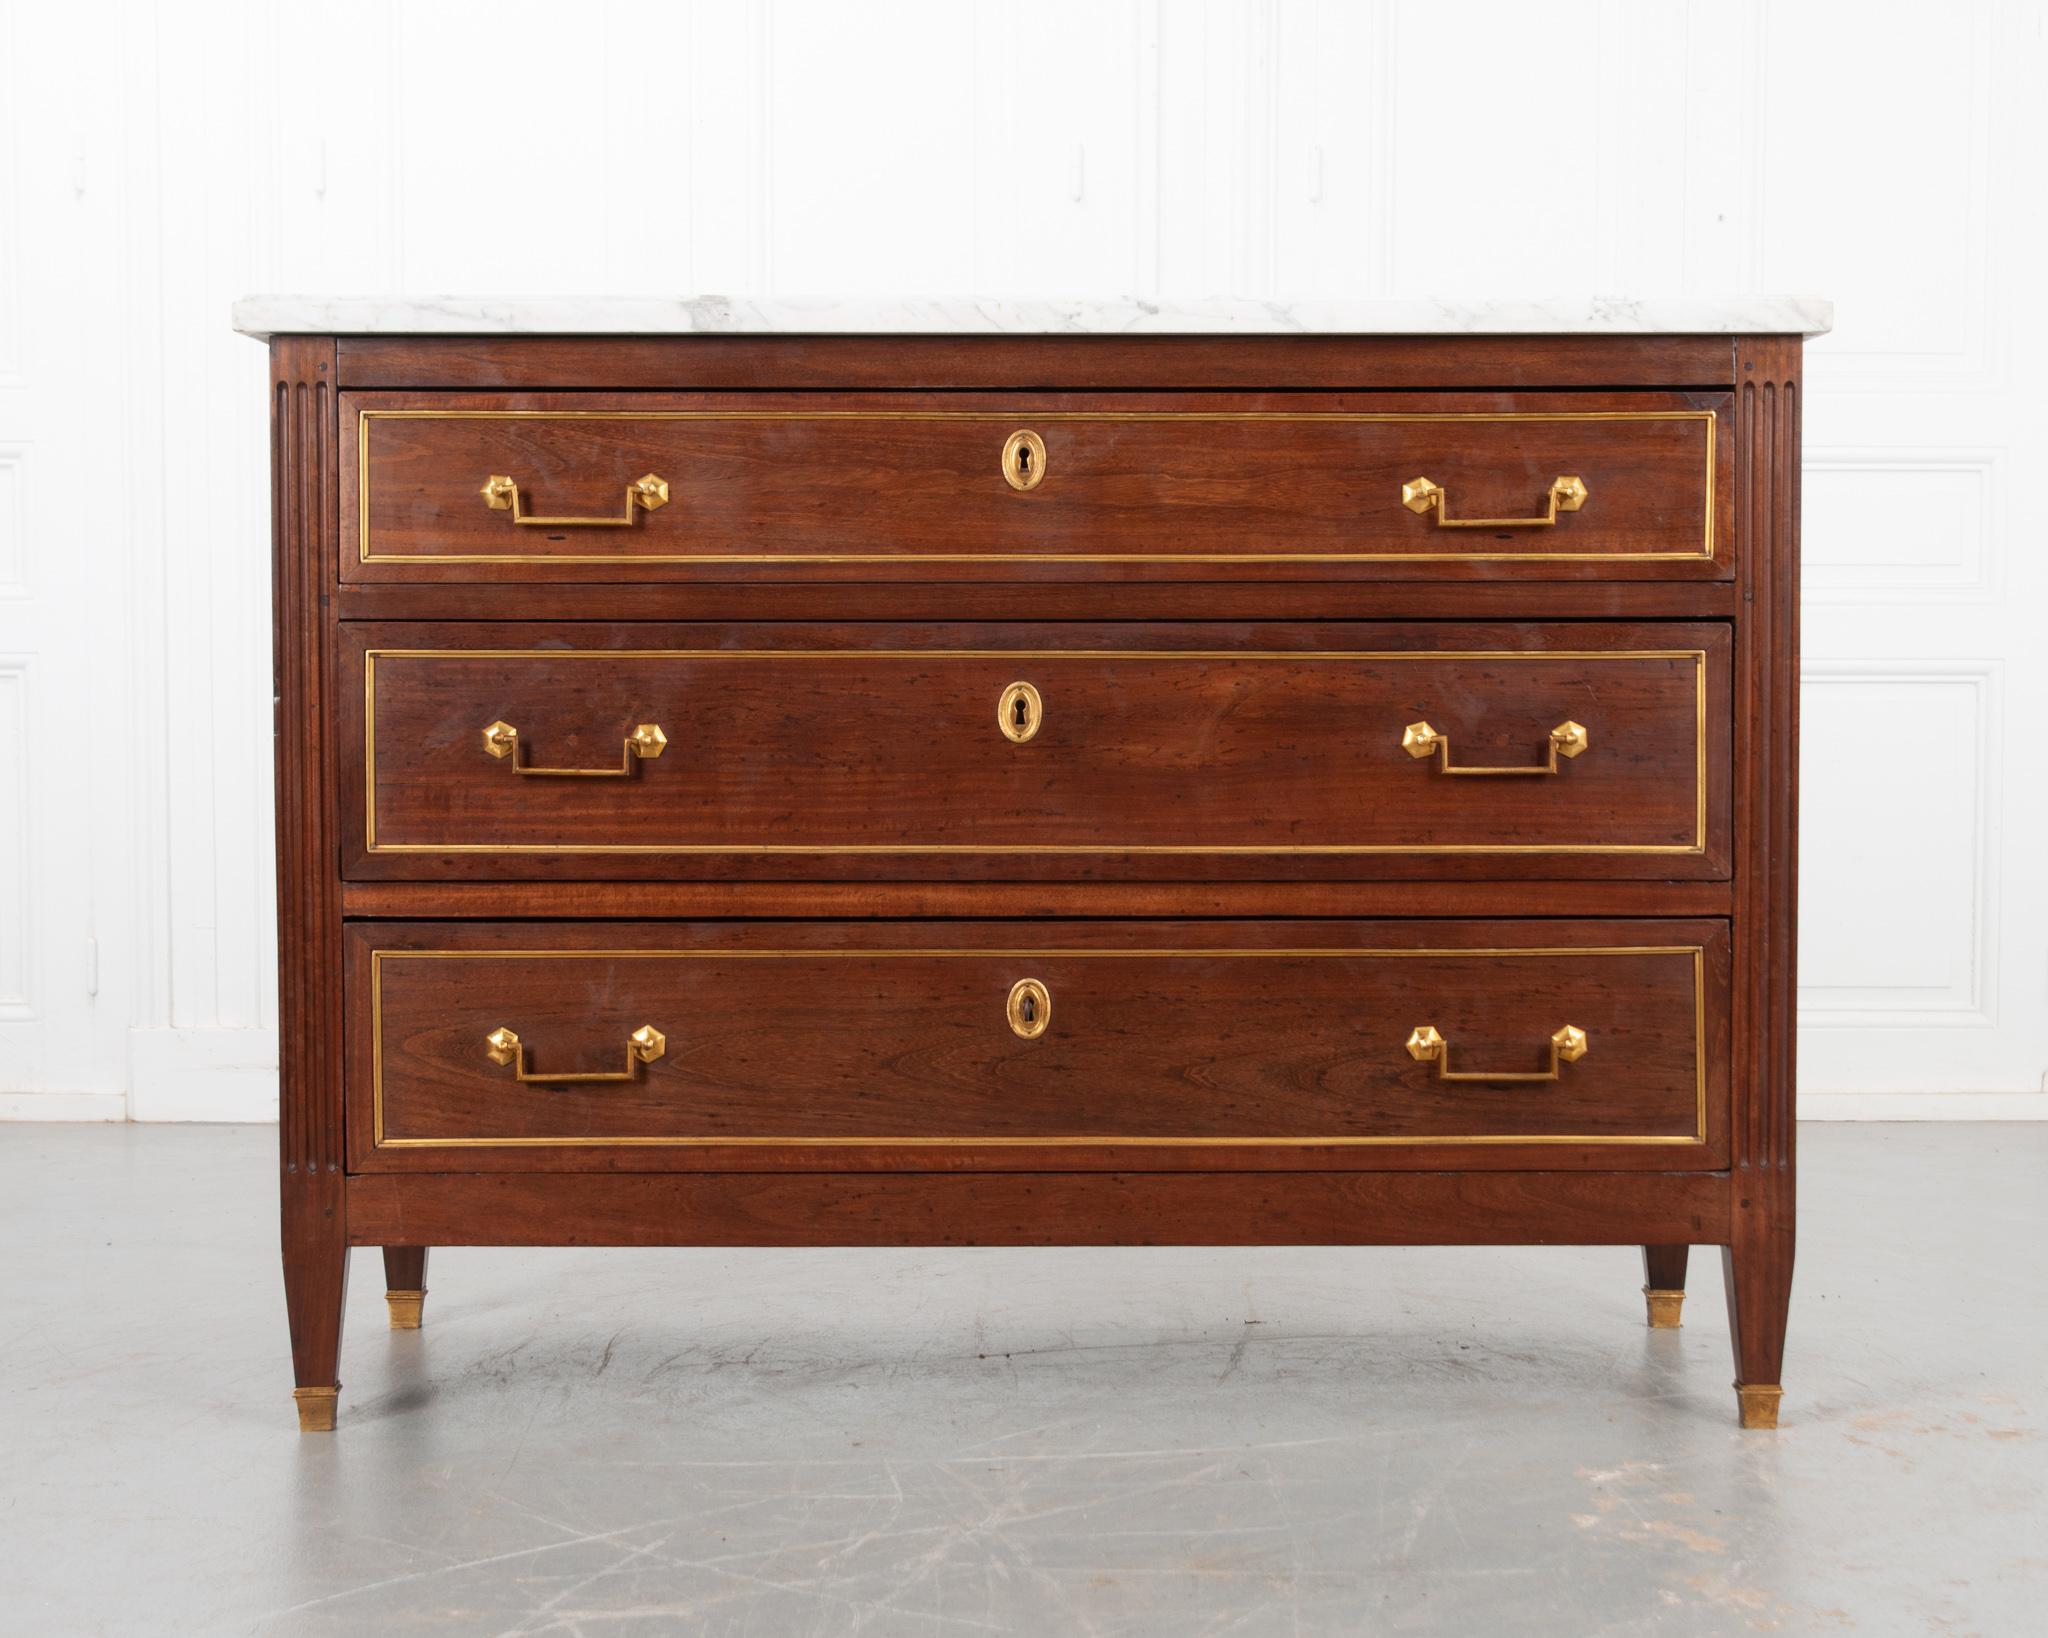 A wonderful Louis XVI style commode from 19th century France. Mahogany body topped with its original piece of  white marble featuring an ogee edge. Fluted details flank three wide drawers which have all been cleaned and easily open. Each paneled